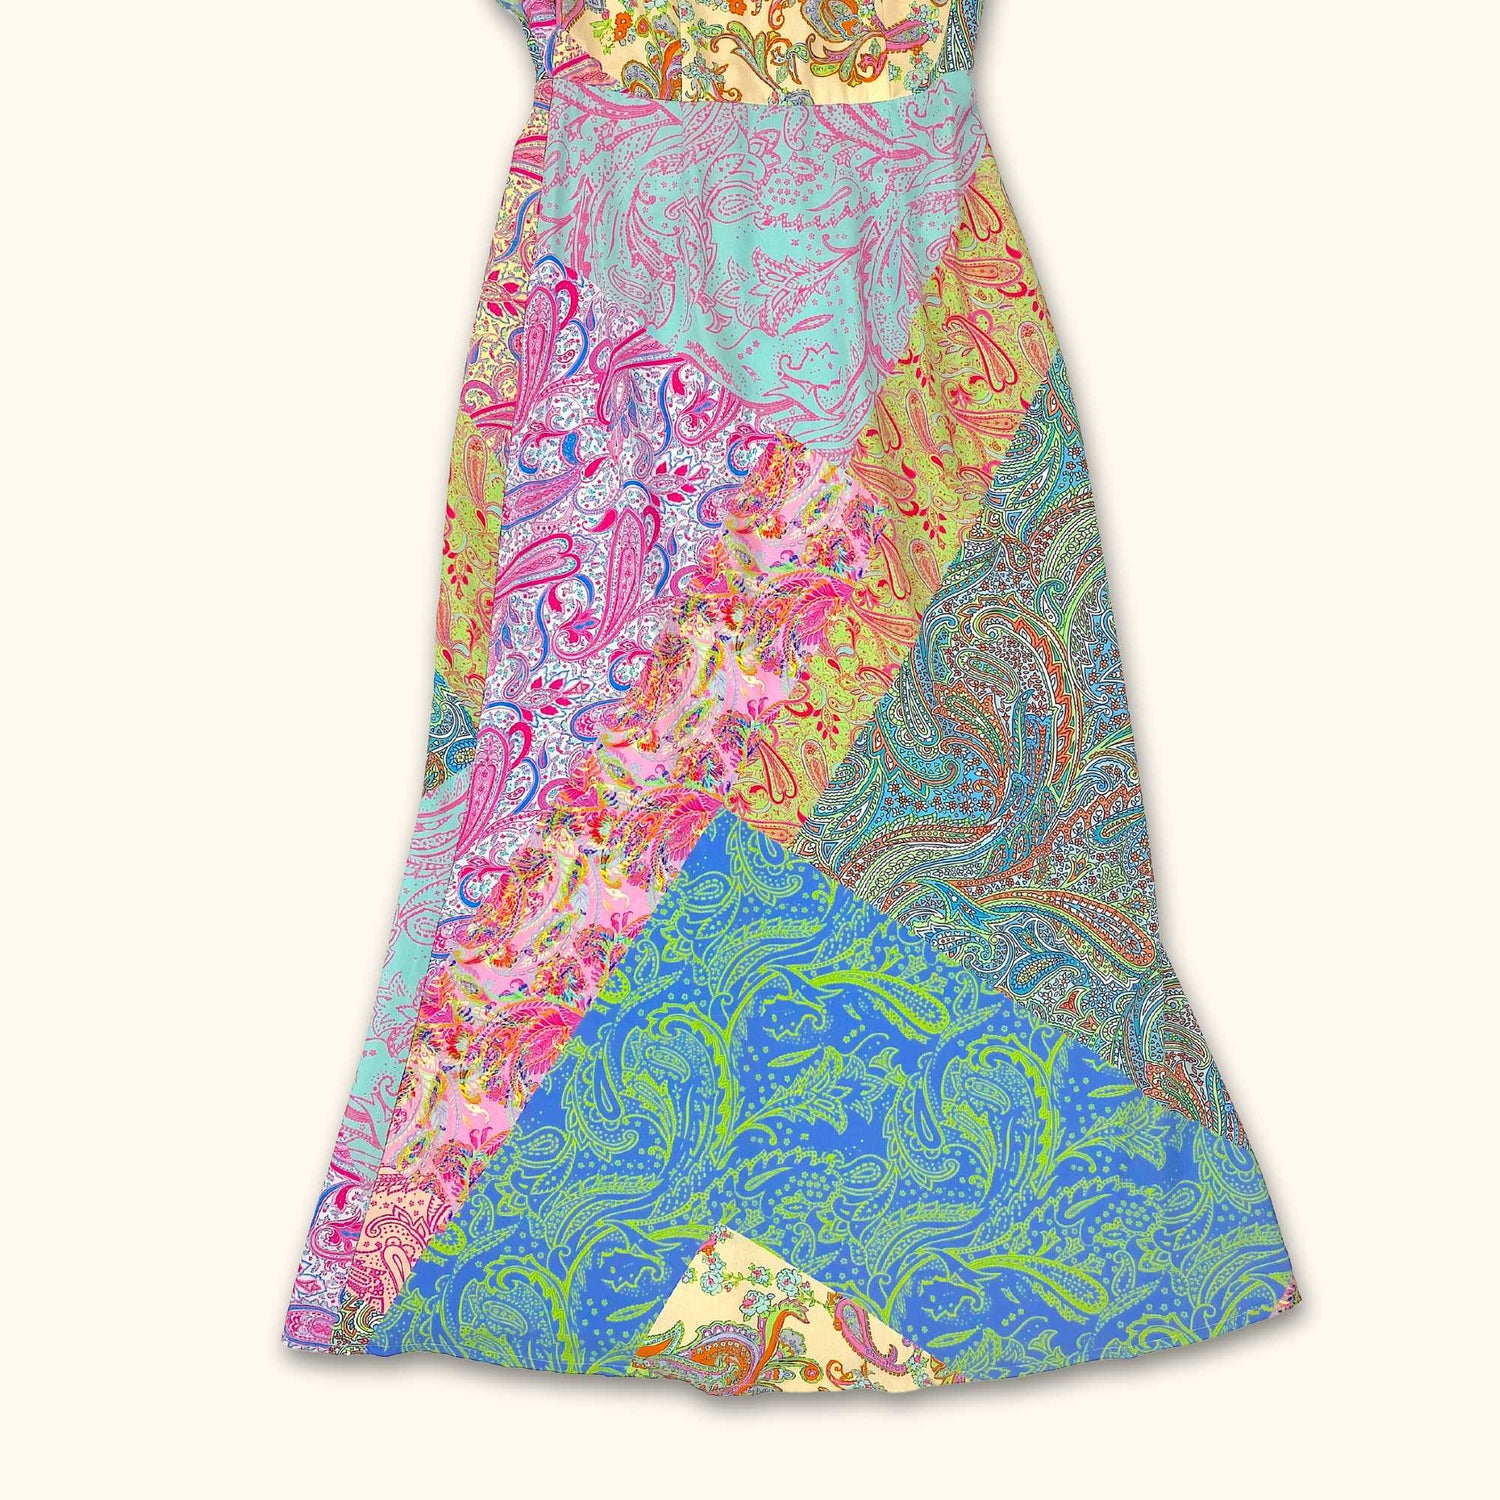 Never Fully Dressed Mixed Paisley Printed Midi Dress - Size 6 - Never fully dressed - Dresses